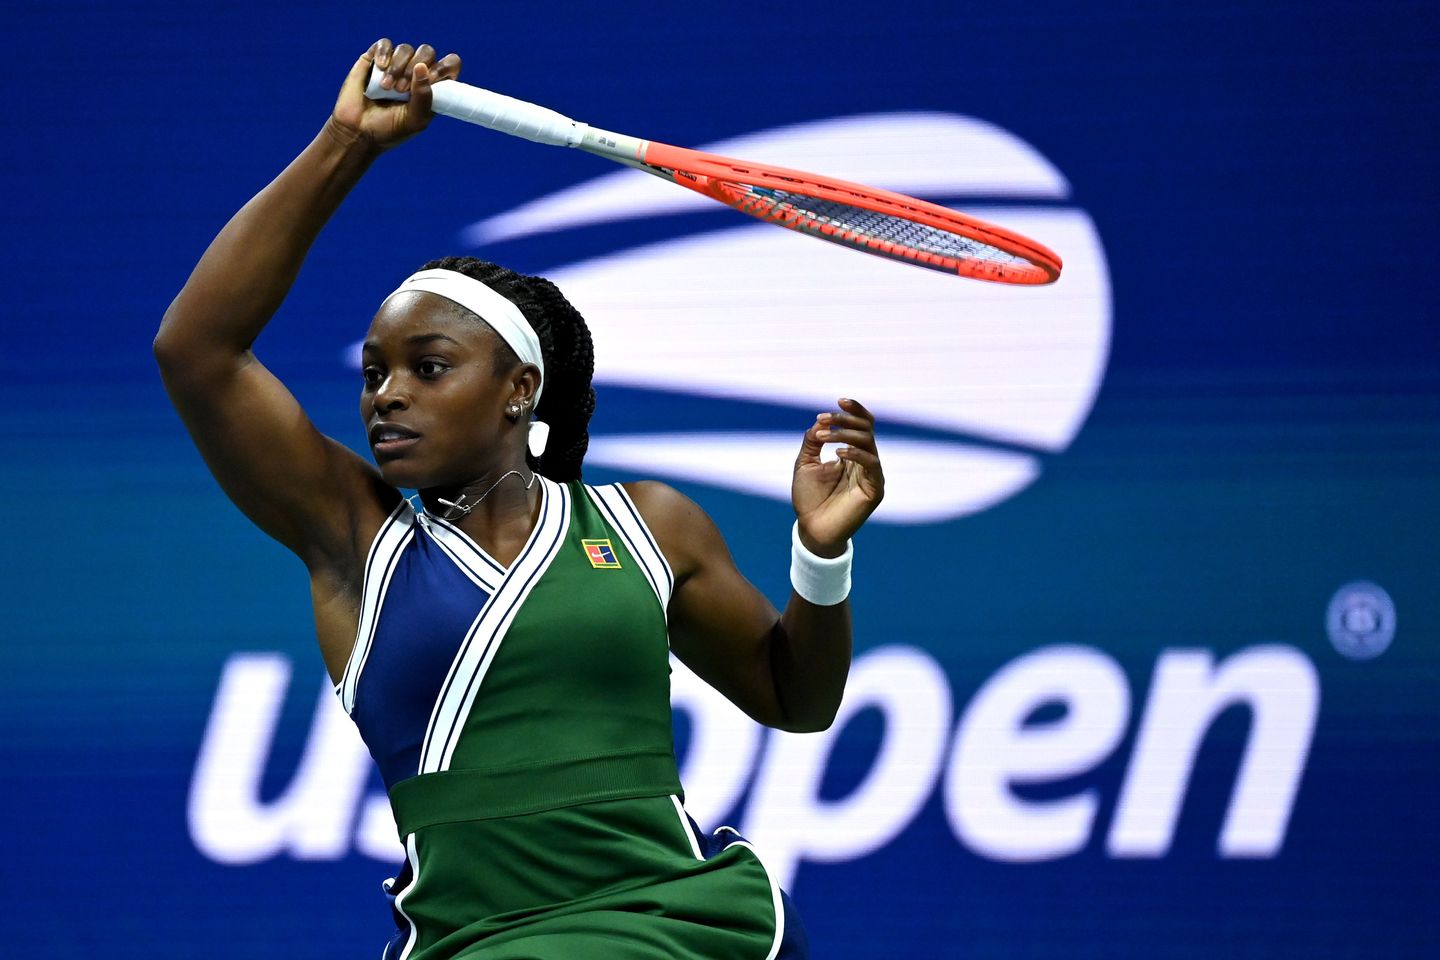 US Open: Sloane Stephens defeats Coco Gauff in 66-minute rout